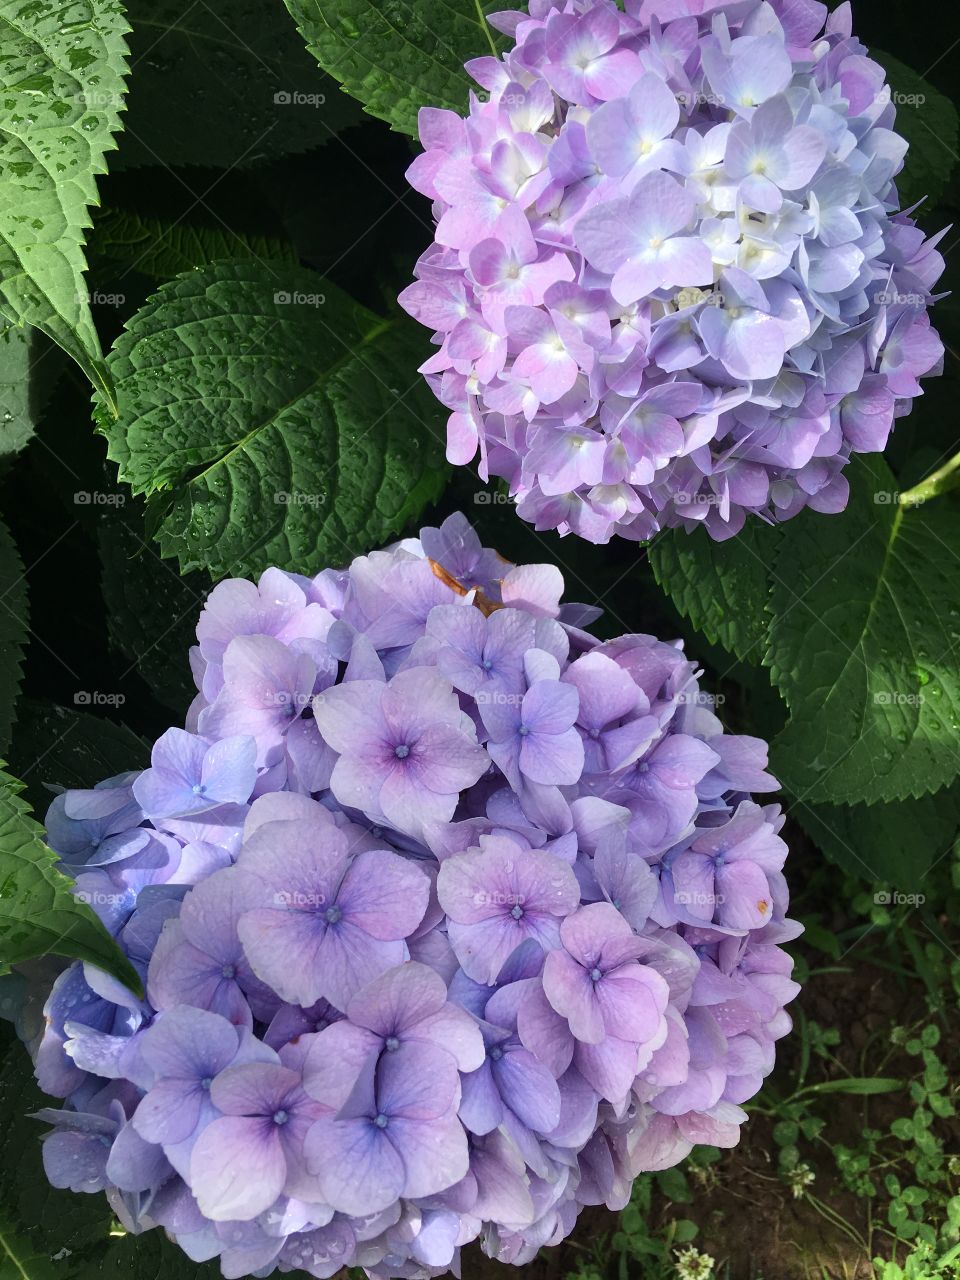 Against my 94 year old neighbors house is these beautiful hydrangeas she still takes care of her flowers!